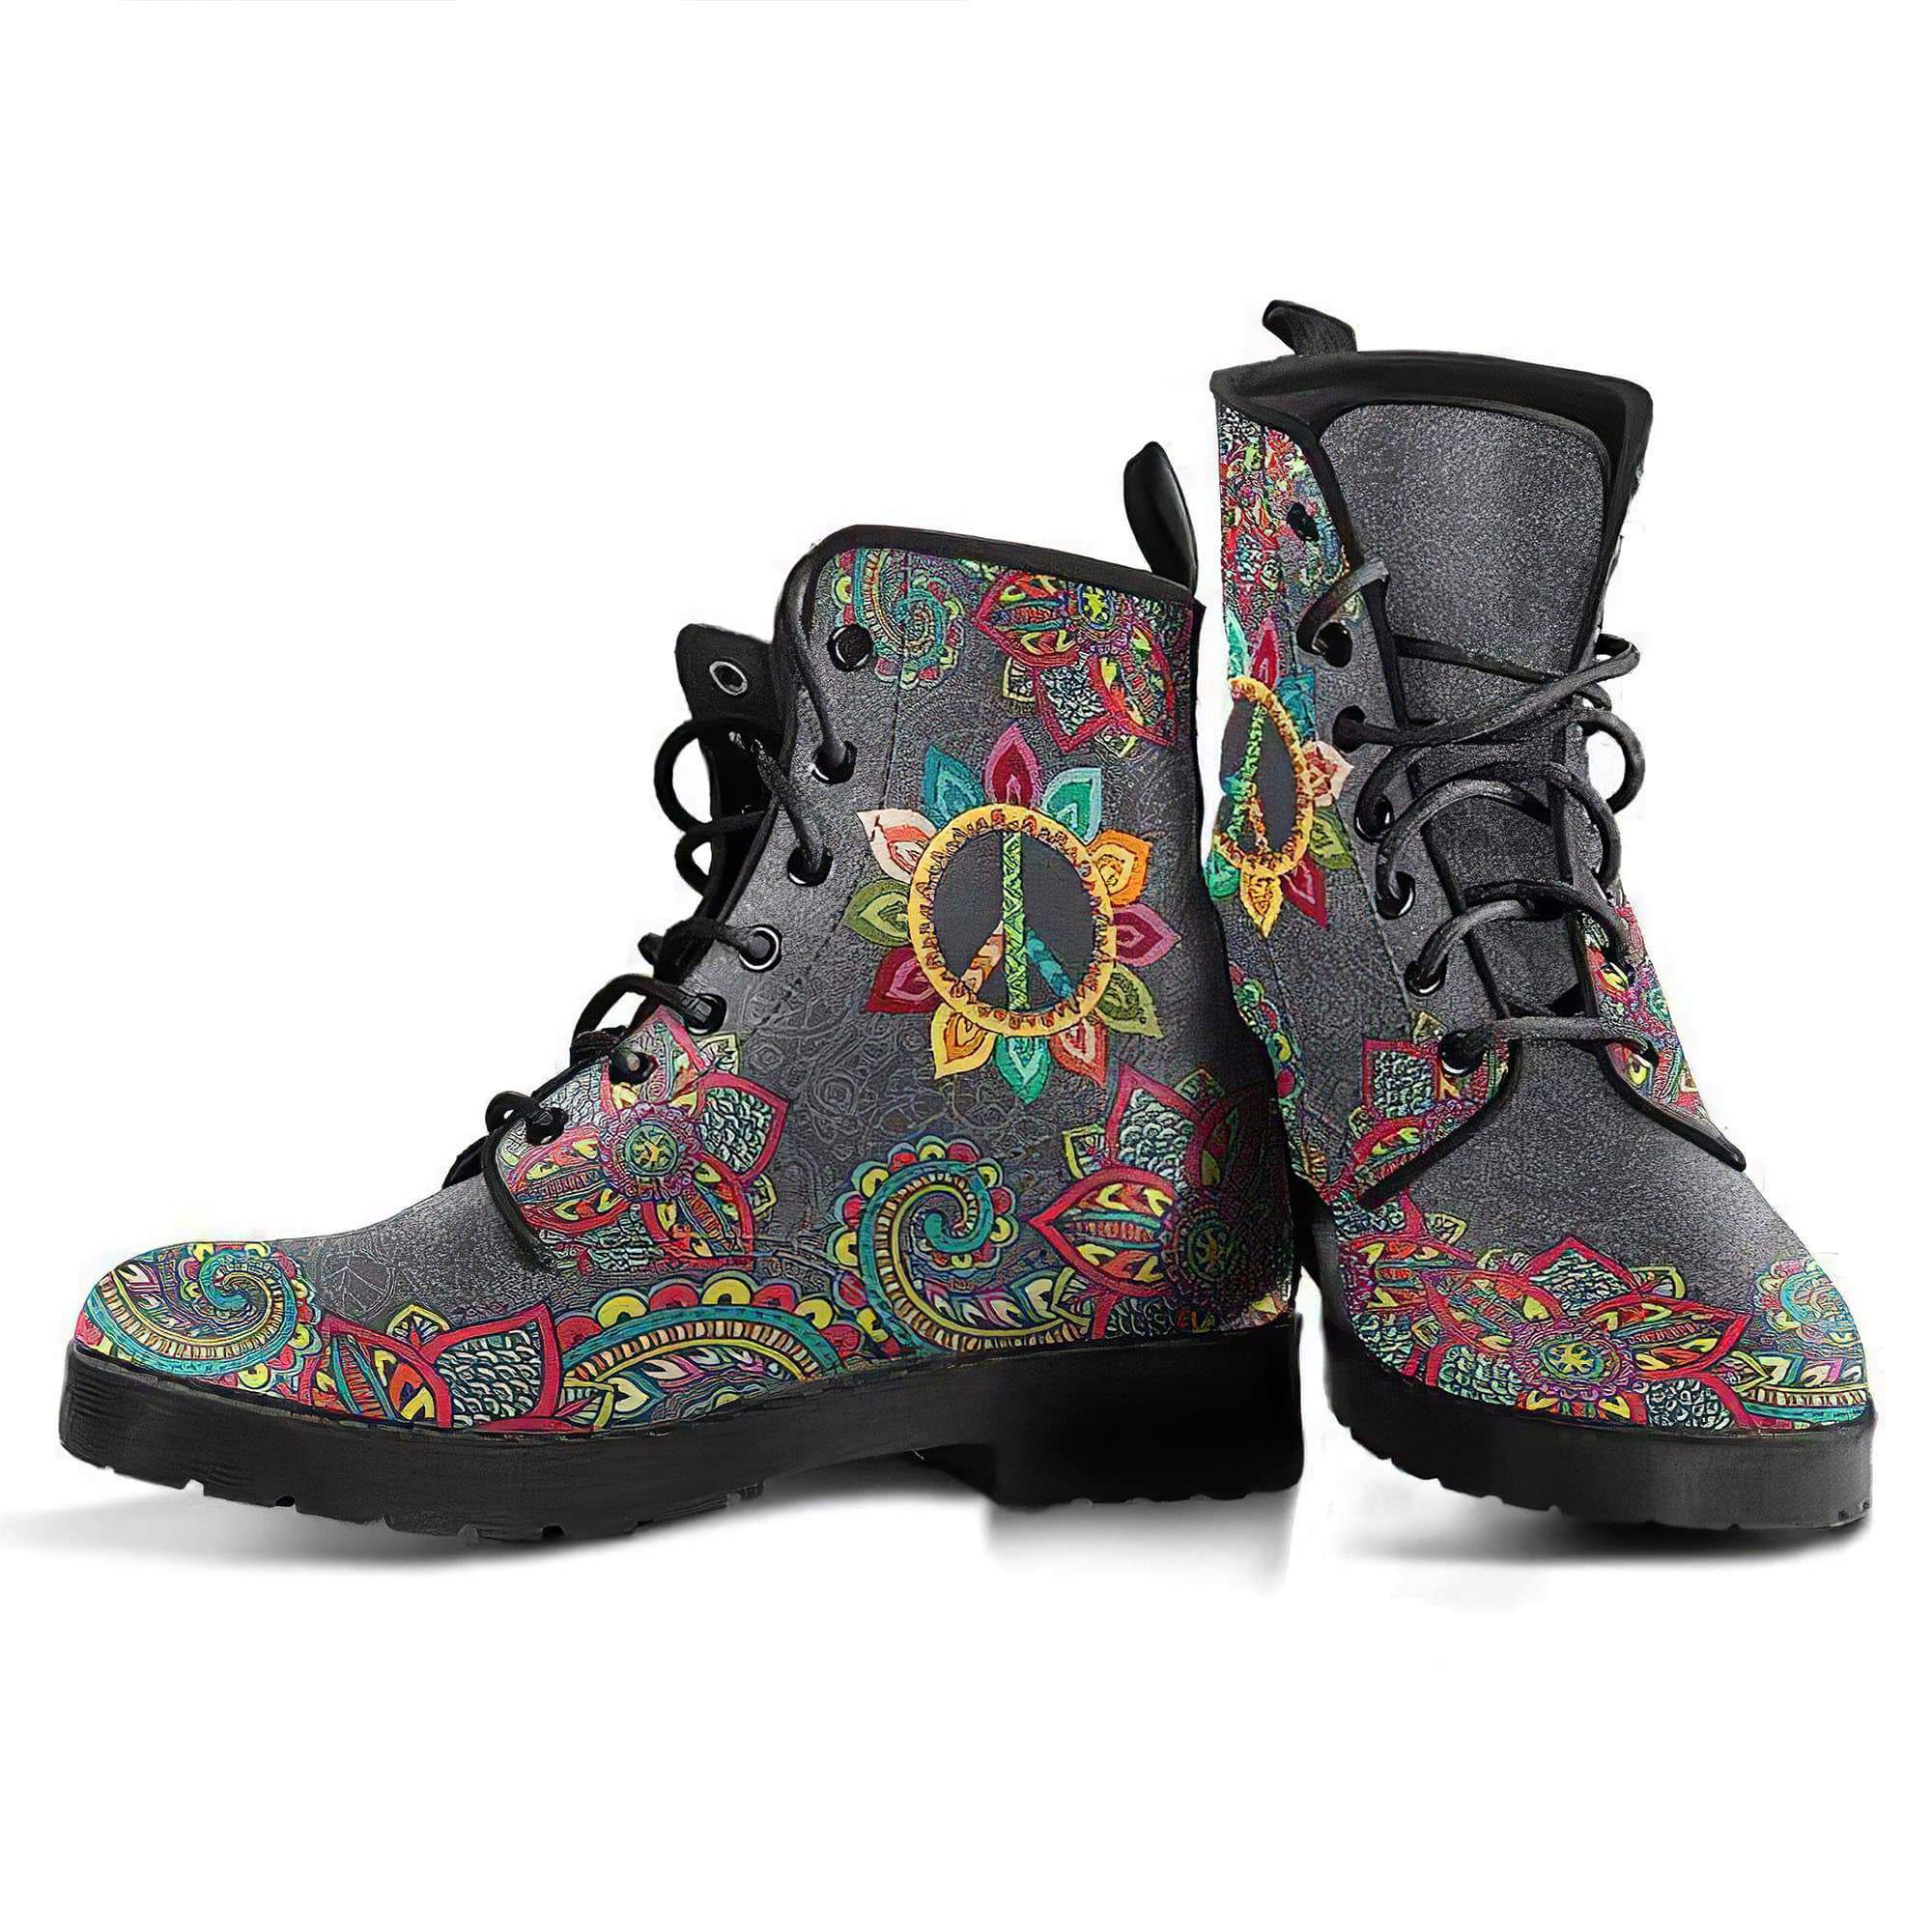 peace-henna-women-s-boots-vegan-friendly-leather-women-s-leather-boots-12051924779069.jpg